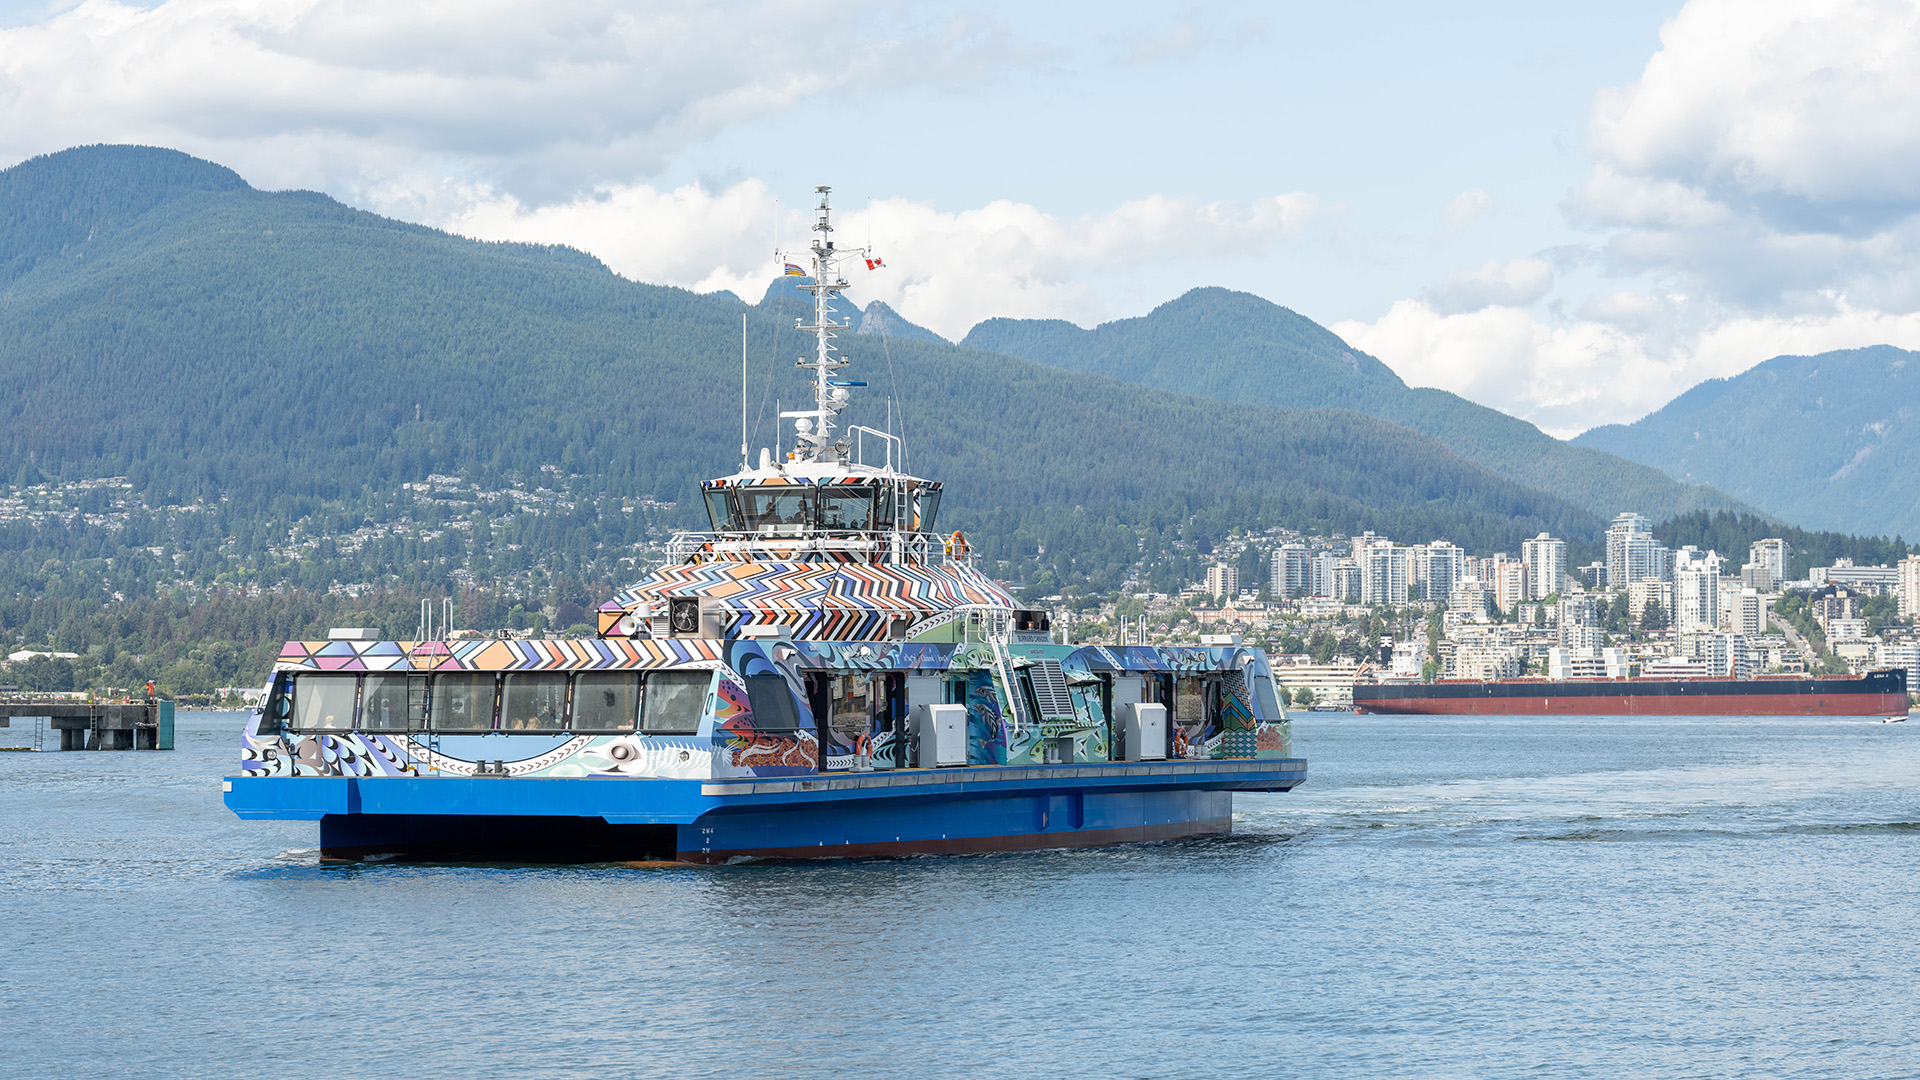 The Burrard Chinook SeaBus sails across the Burrard Inlet